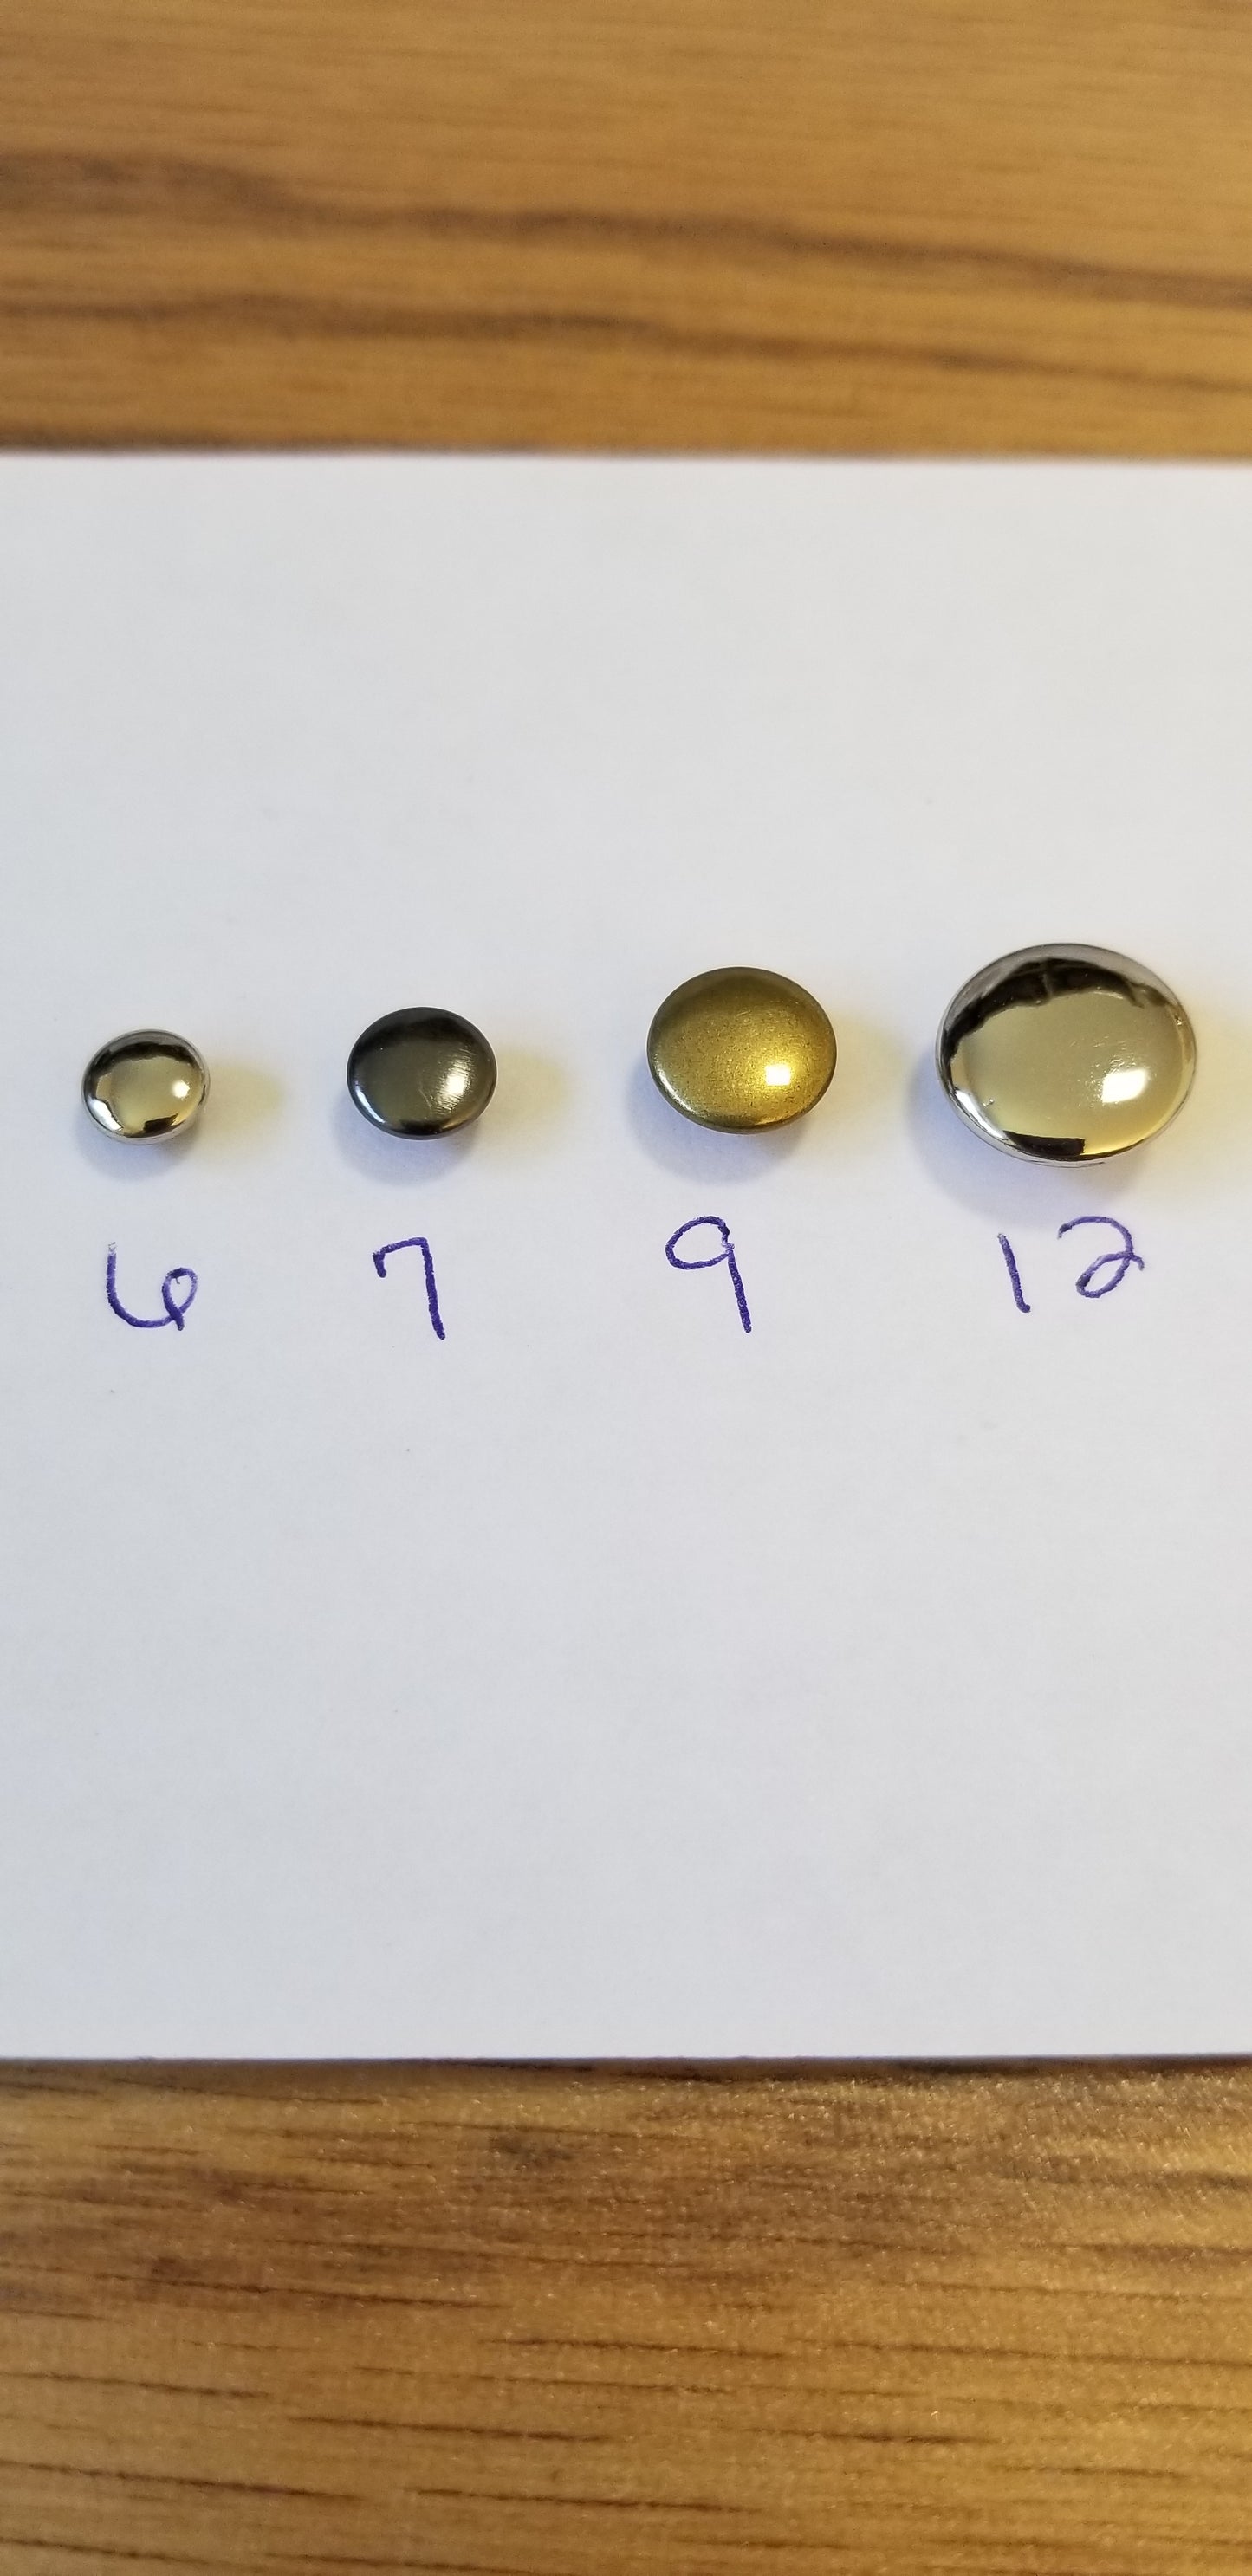 7mm Brass Double Capped Rivets